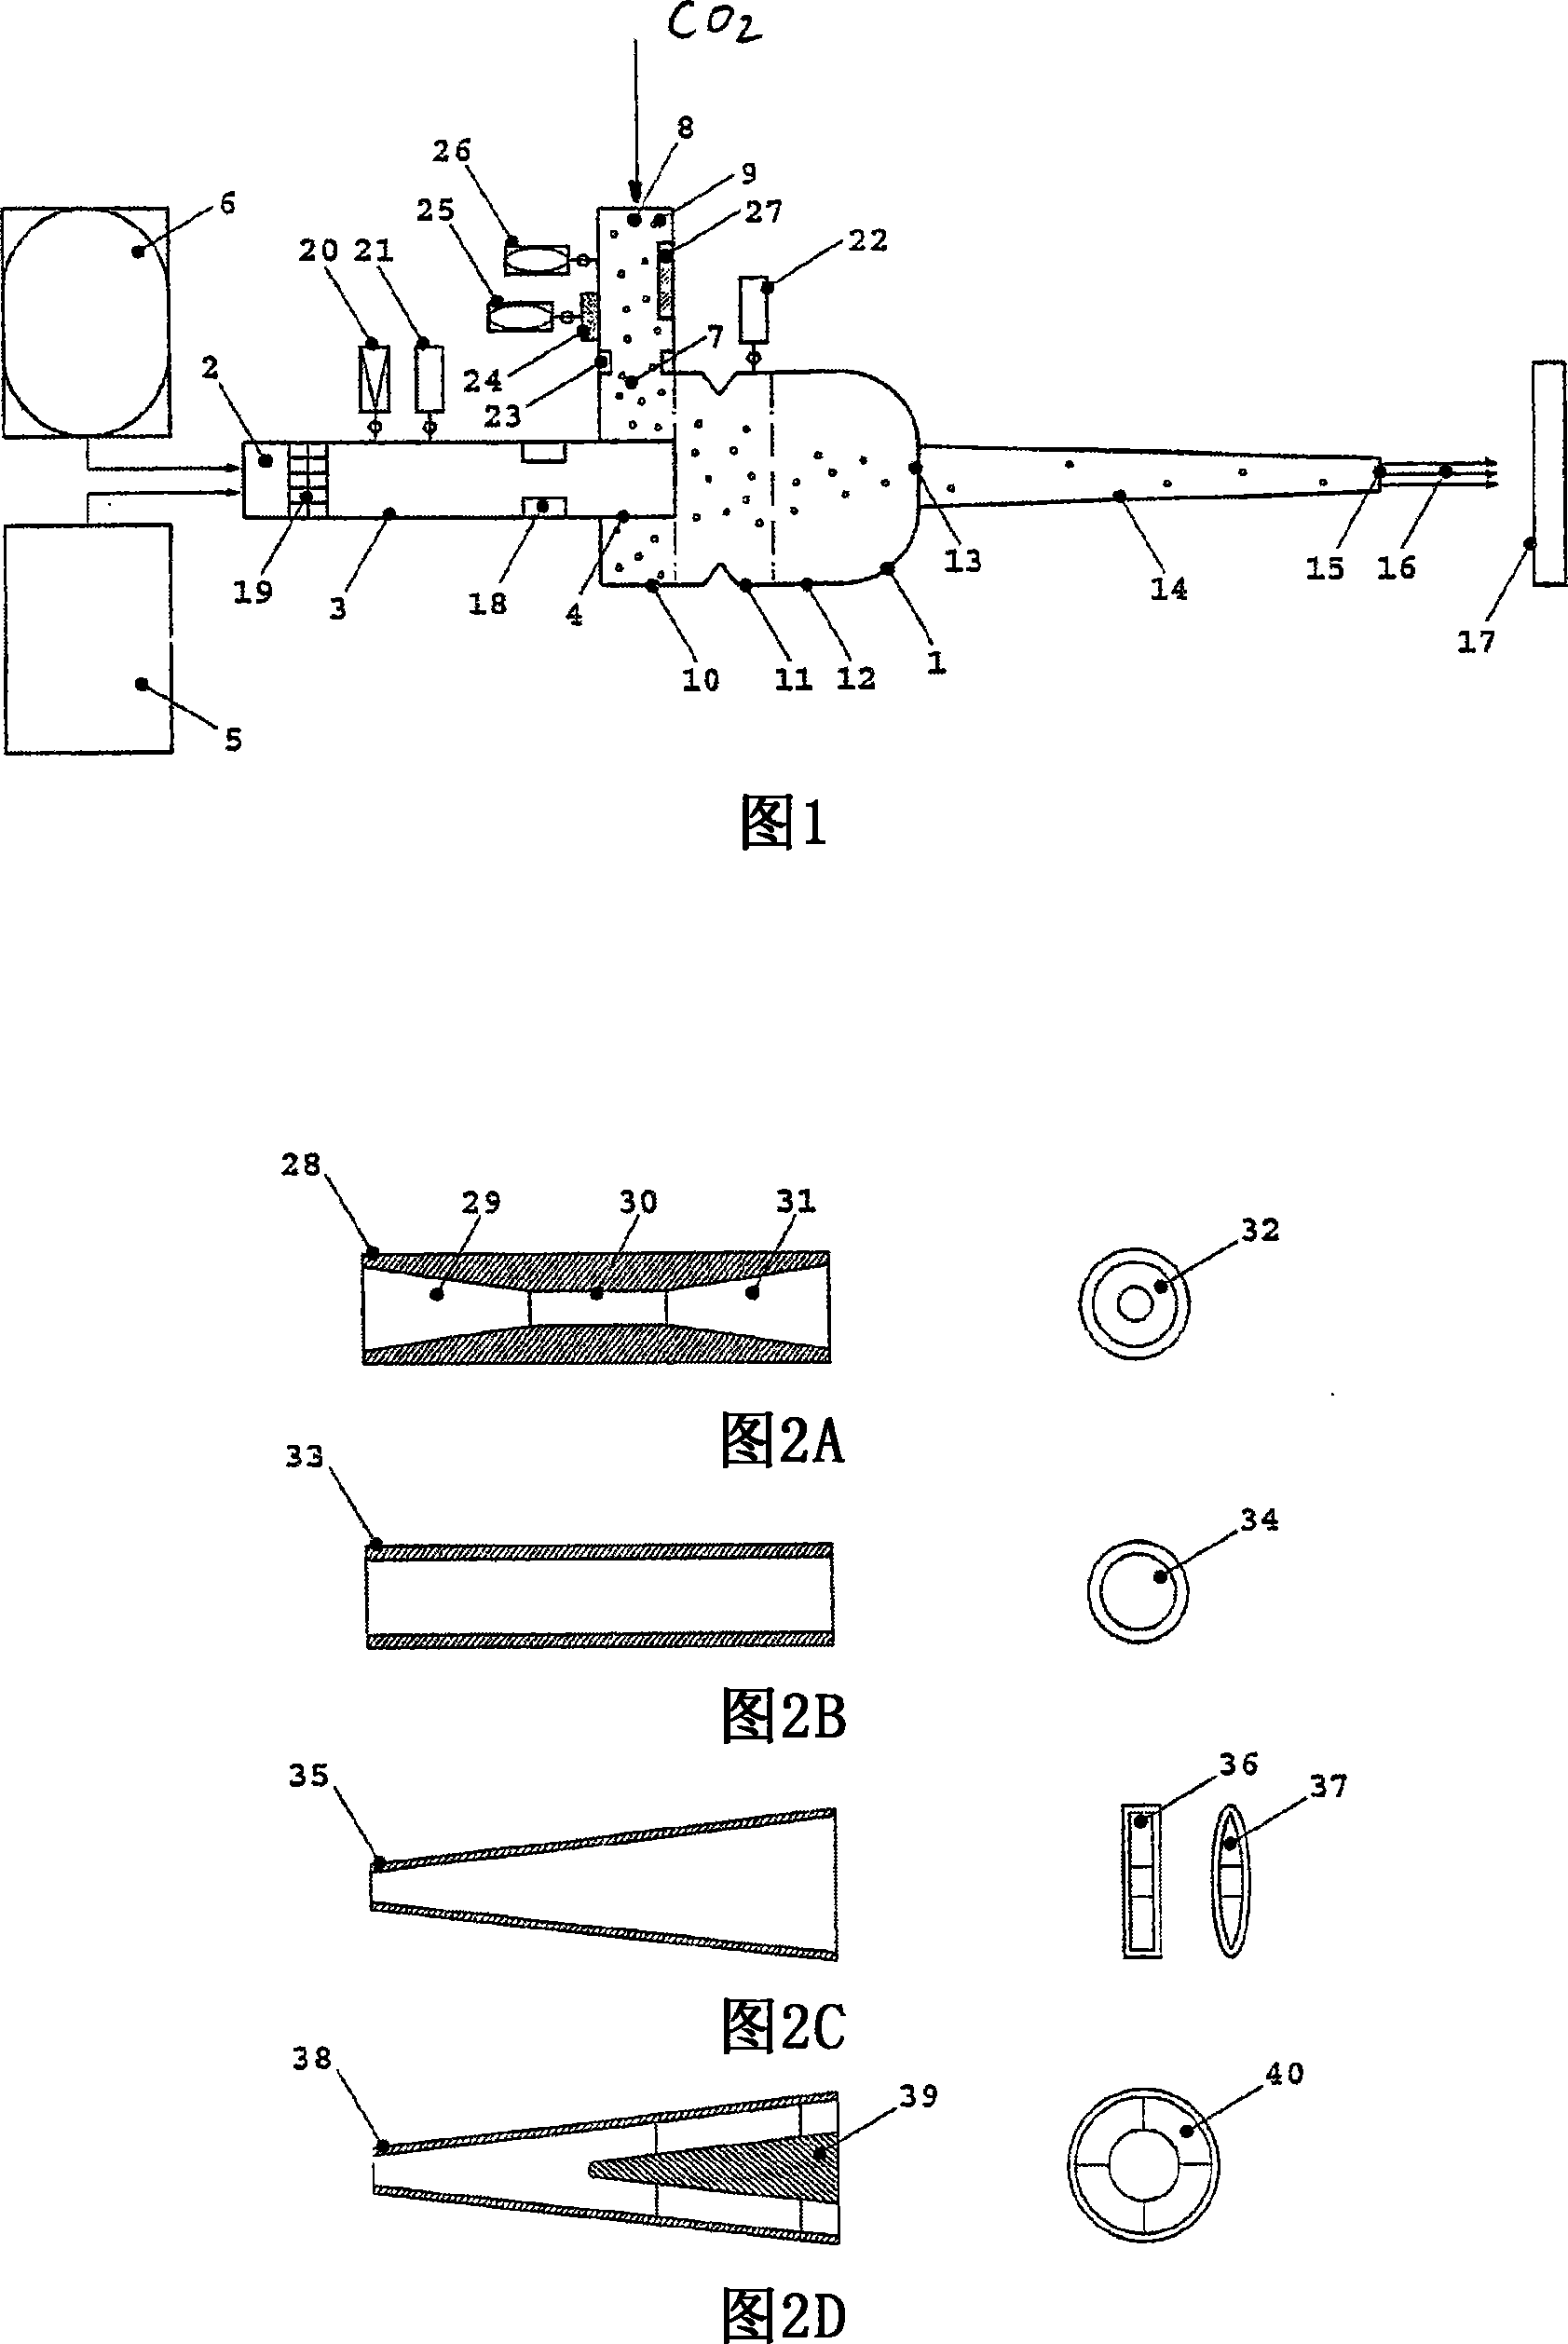 Device and method for cleaning, activating or pre-treating workpieces by blasting carbon dioxide snow